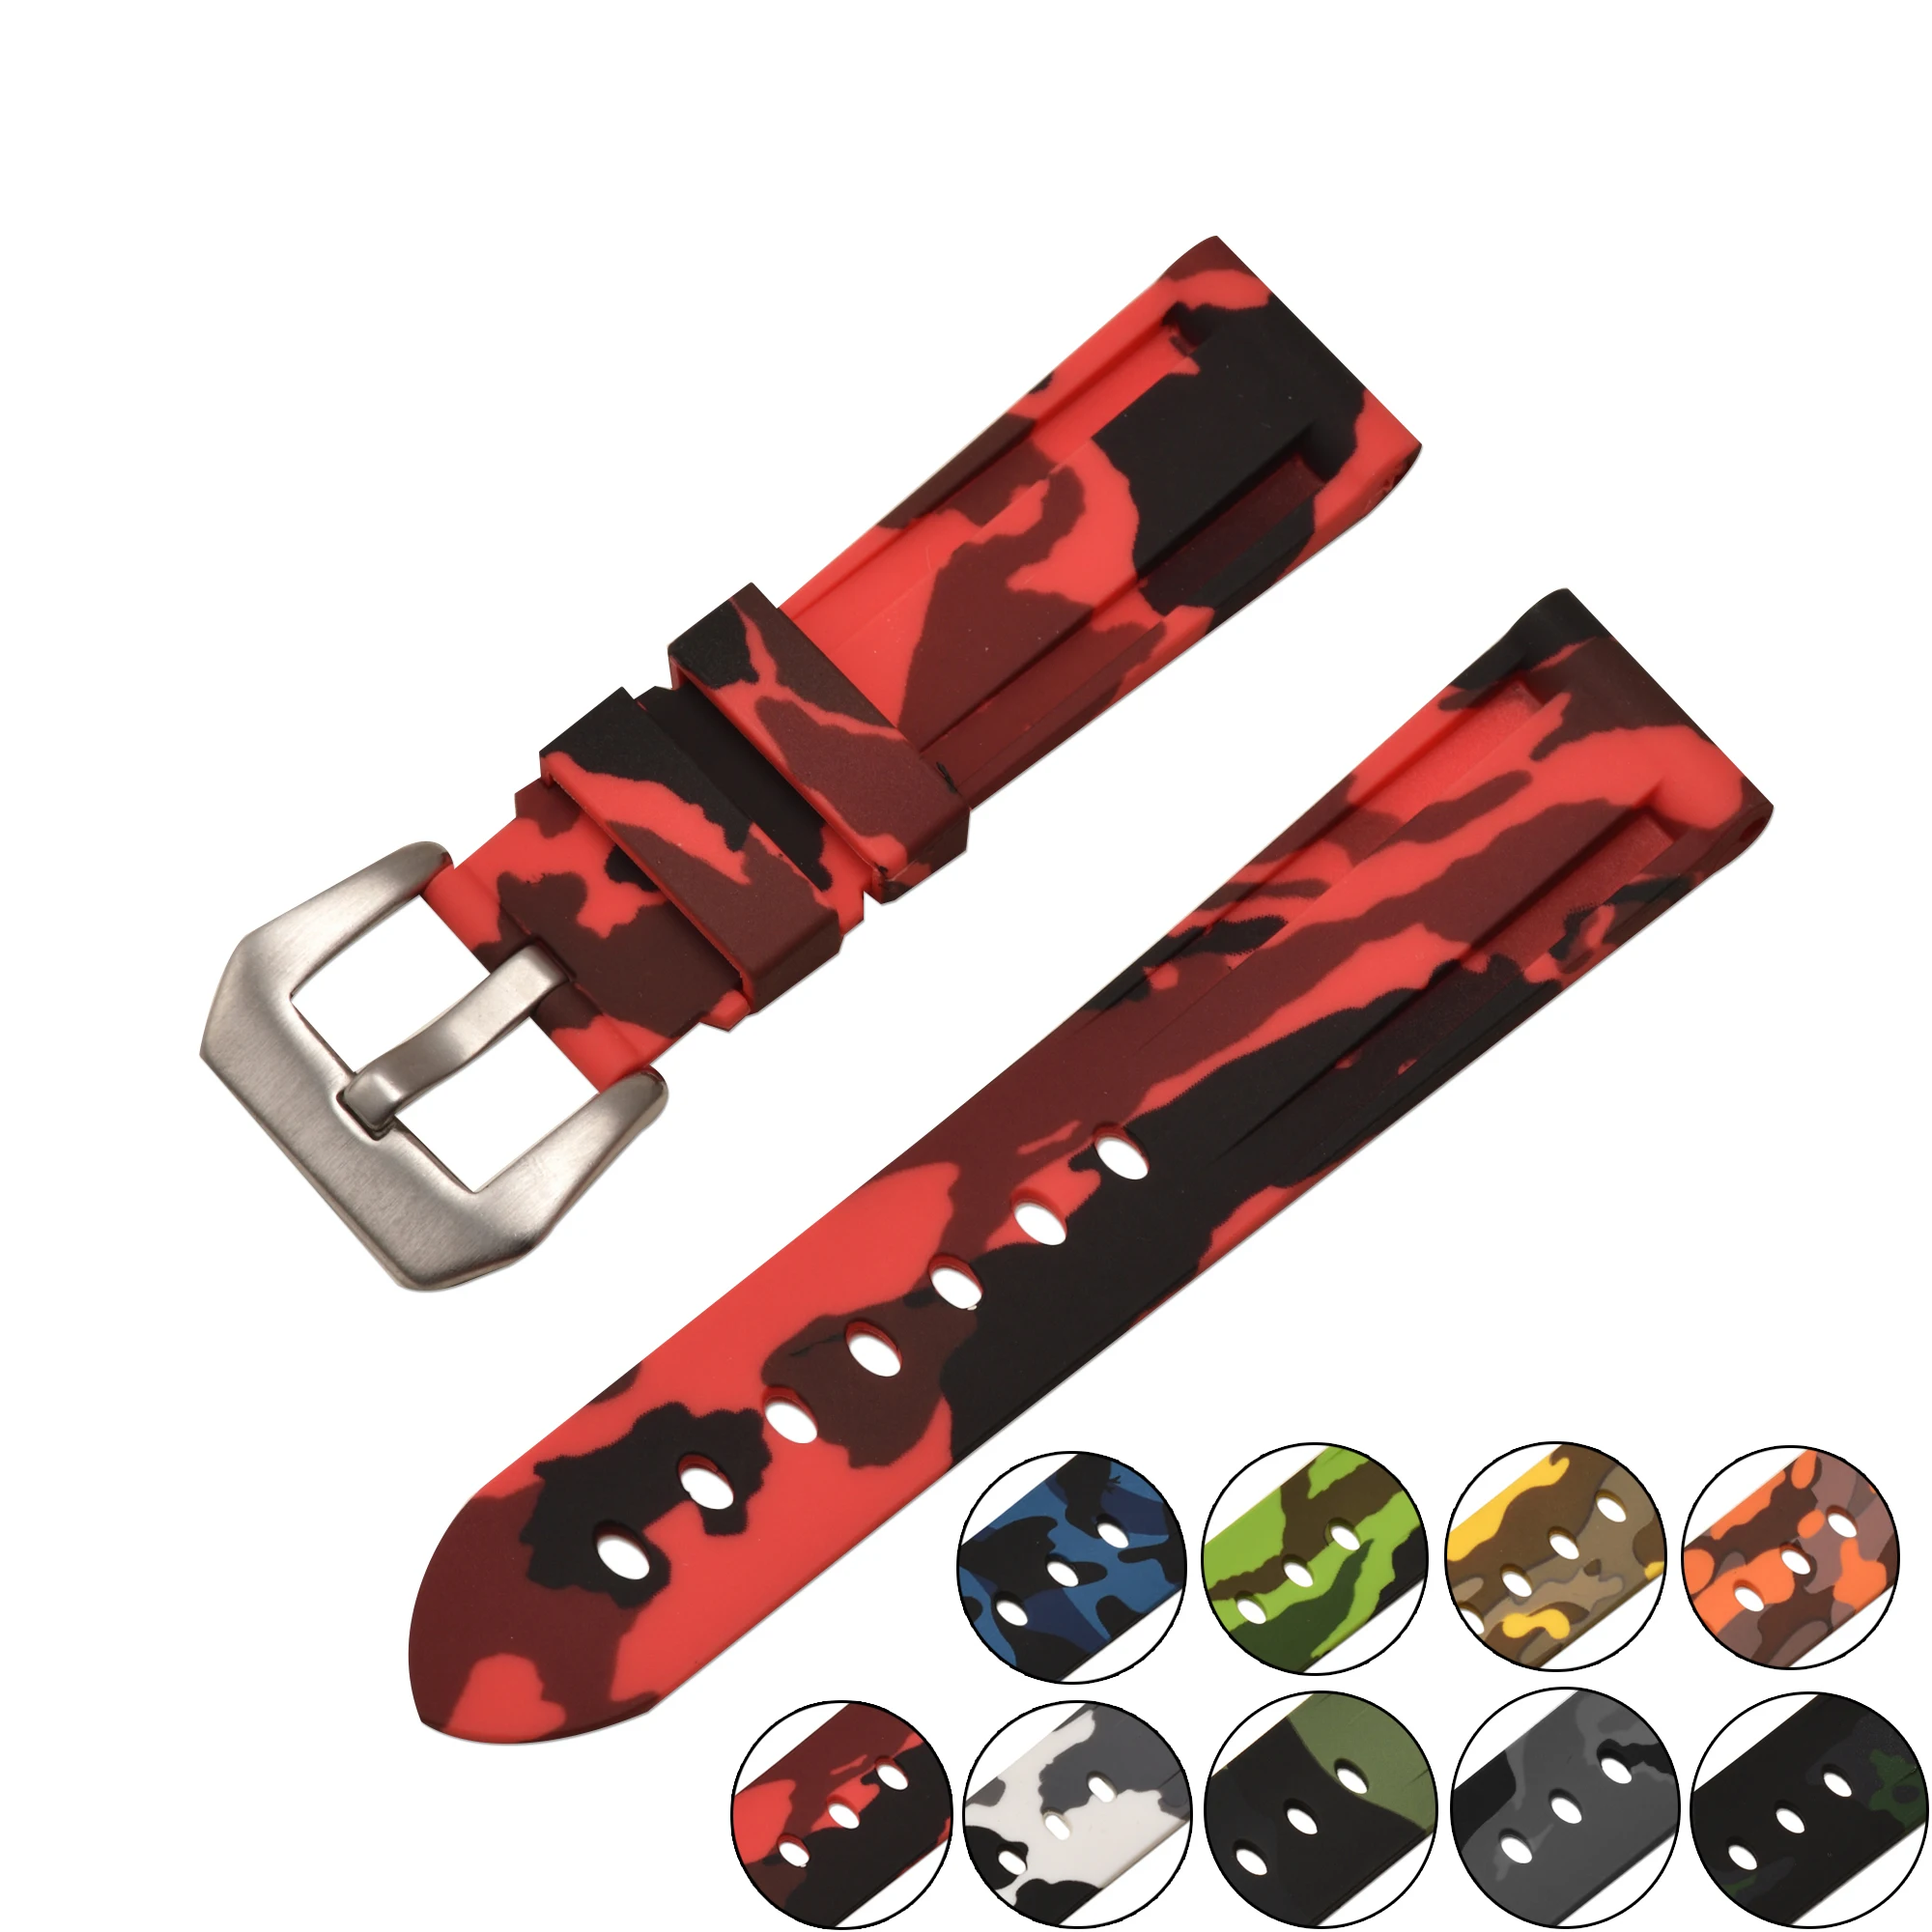 

EACHE Camouflage Watch Strap Rubber For Man Watches 20mm 22mm 24mm Silver Buckle In Stock, As pictures